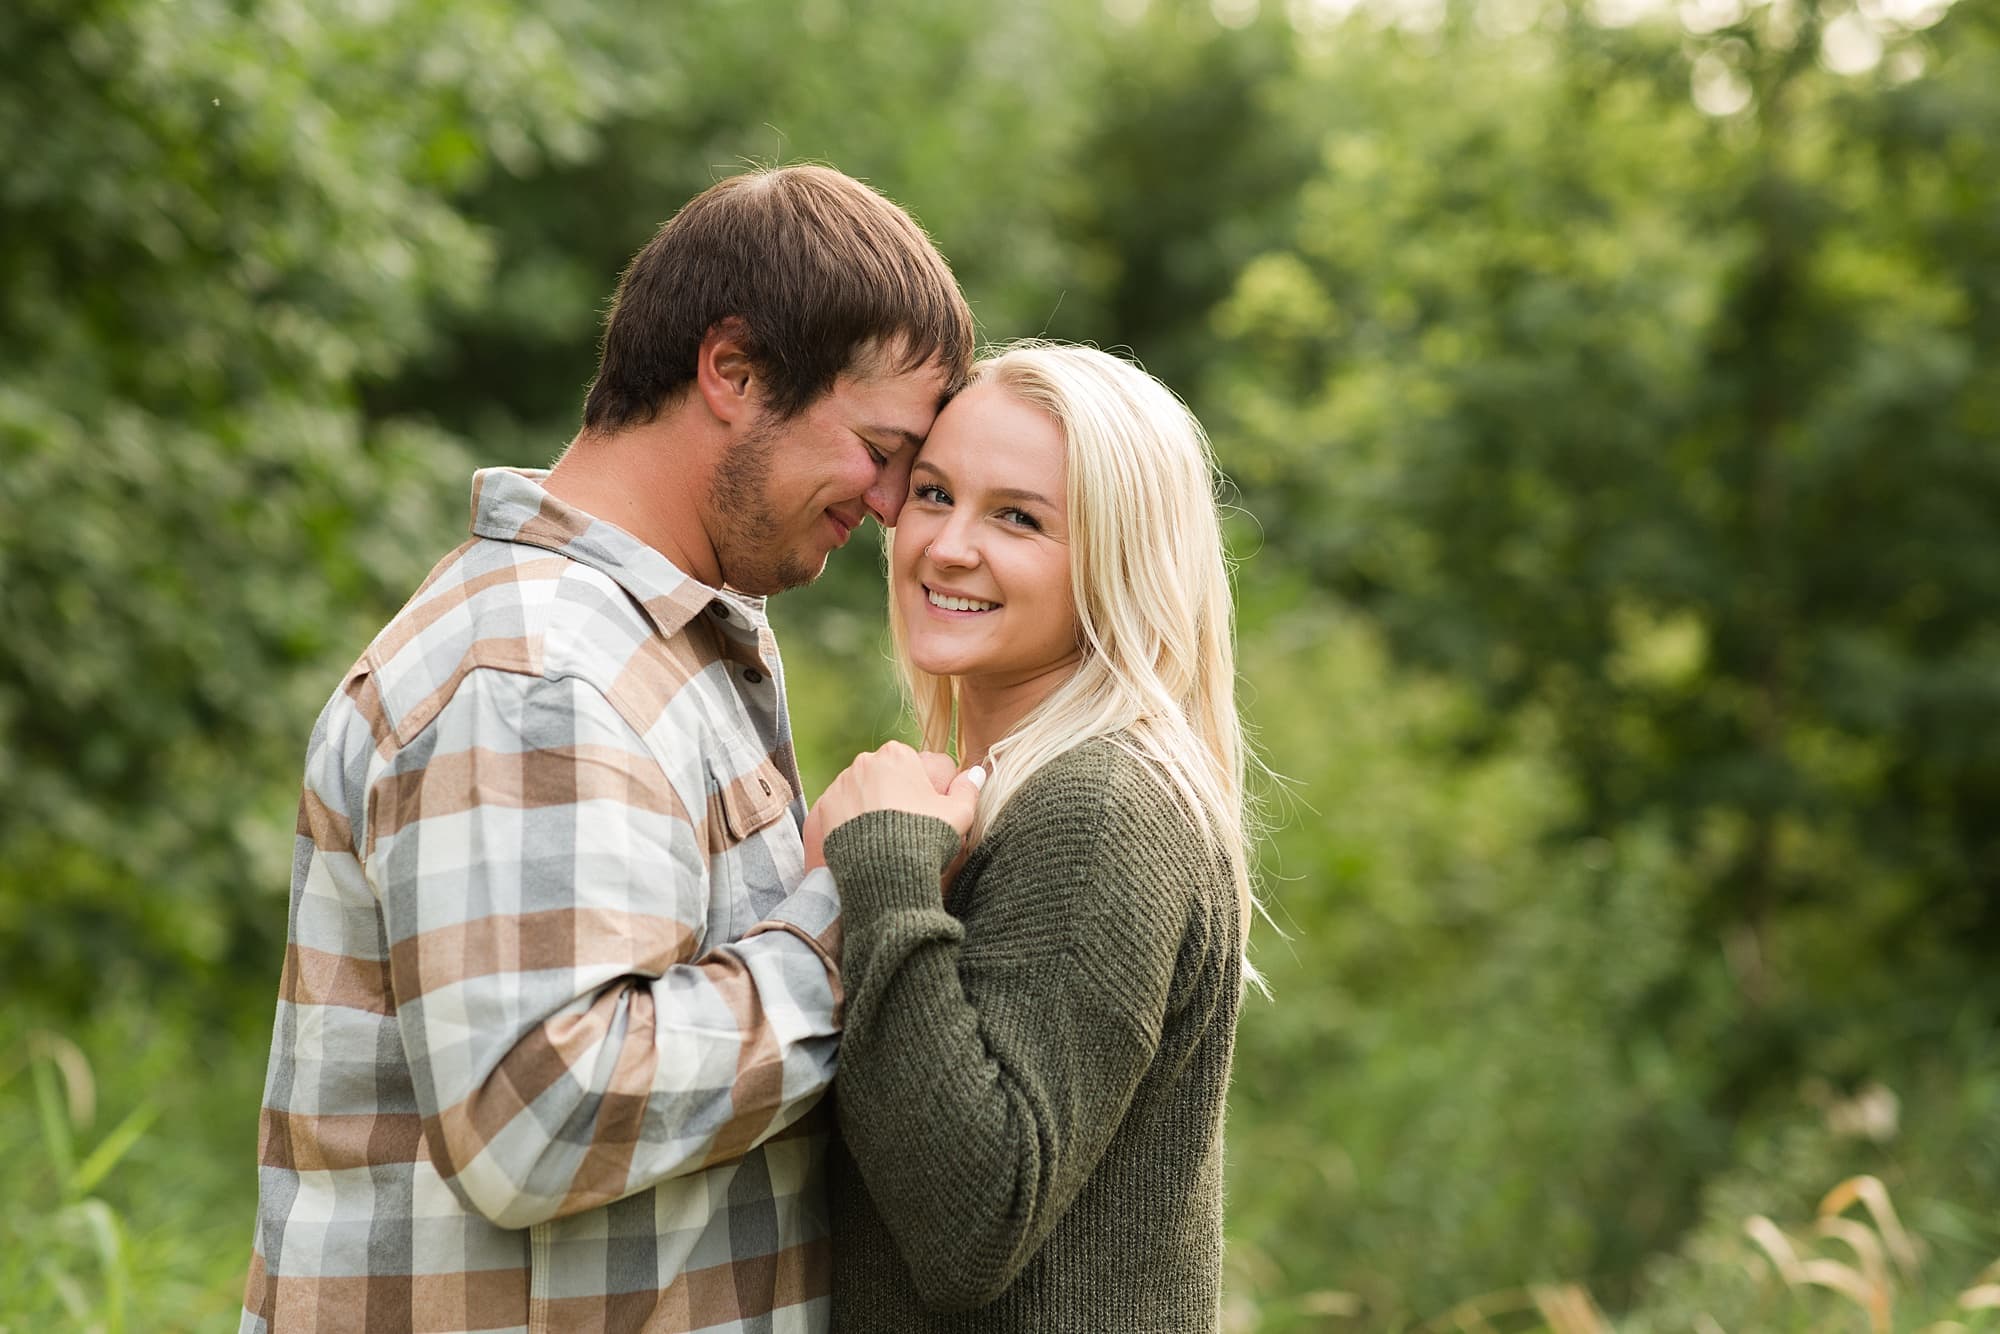 A woman in a green sweater smiles and holds hands with her fiance during their Engagement Session in Lindenwood Park